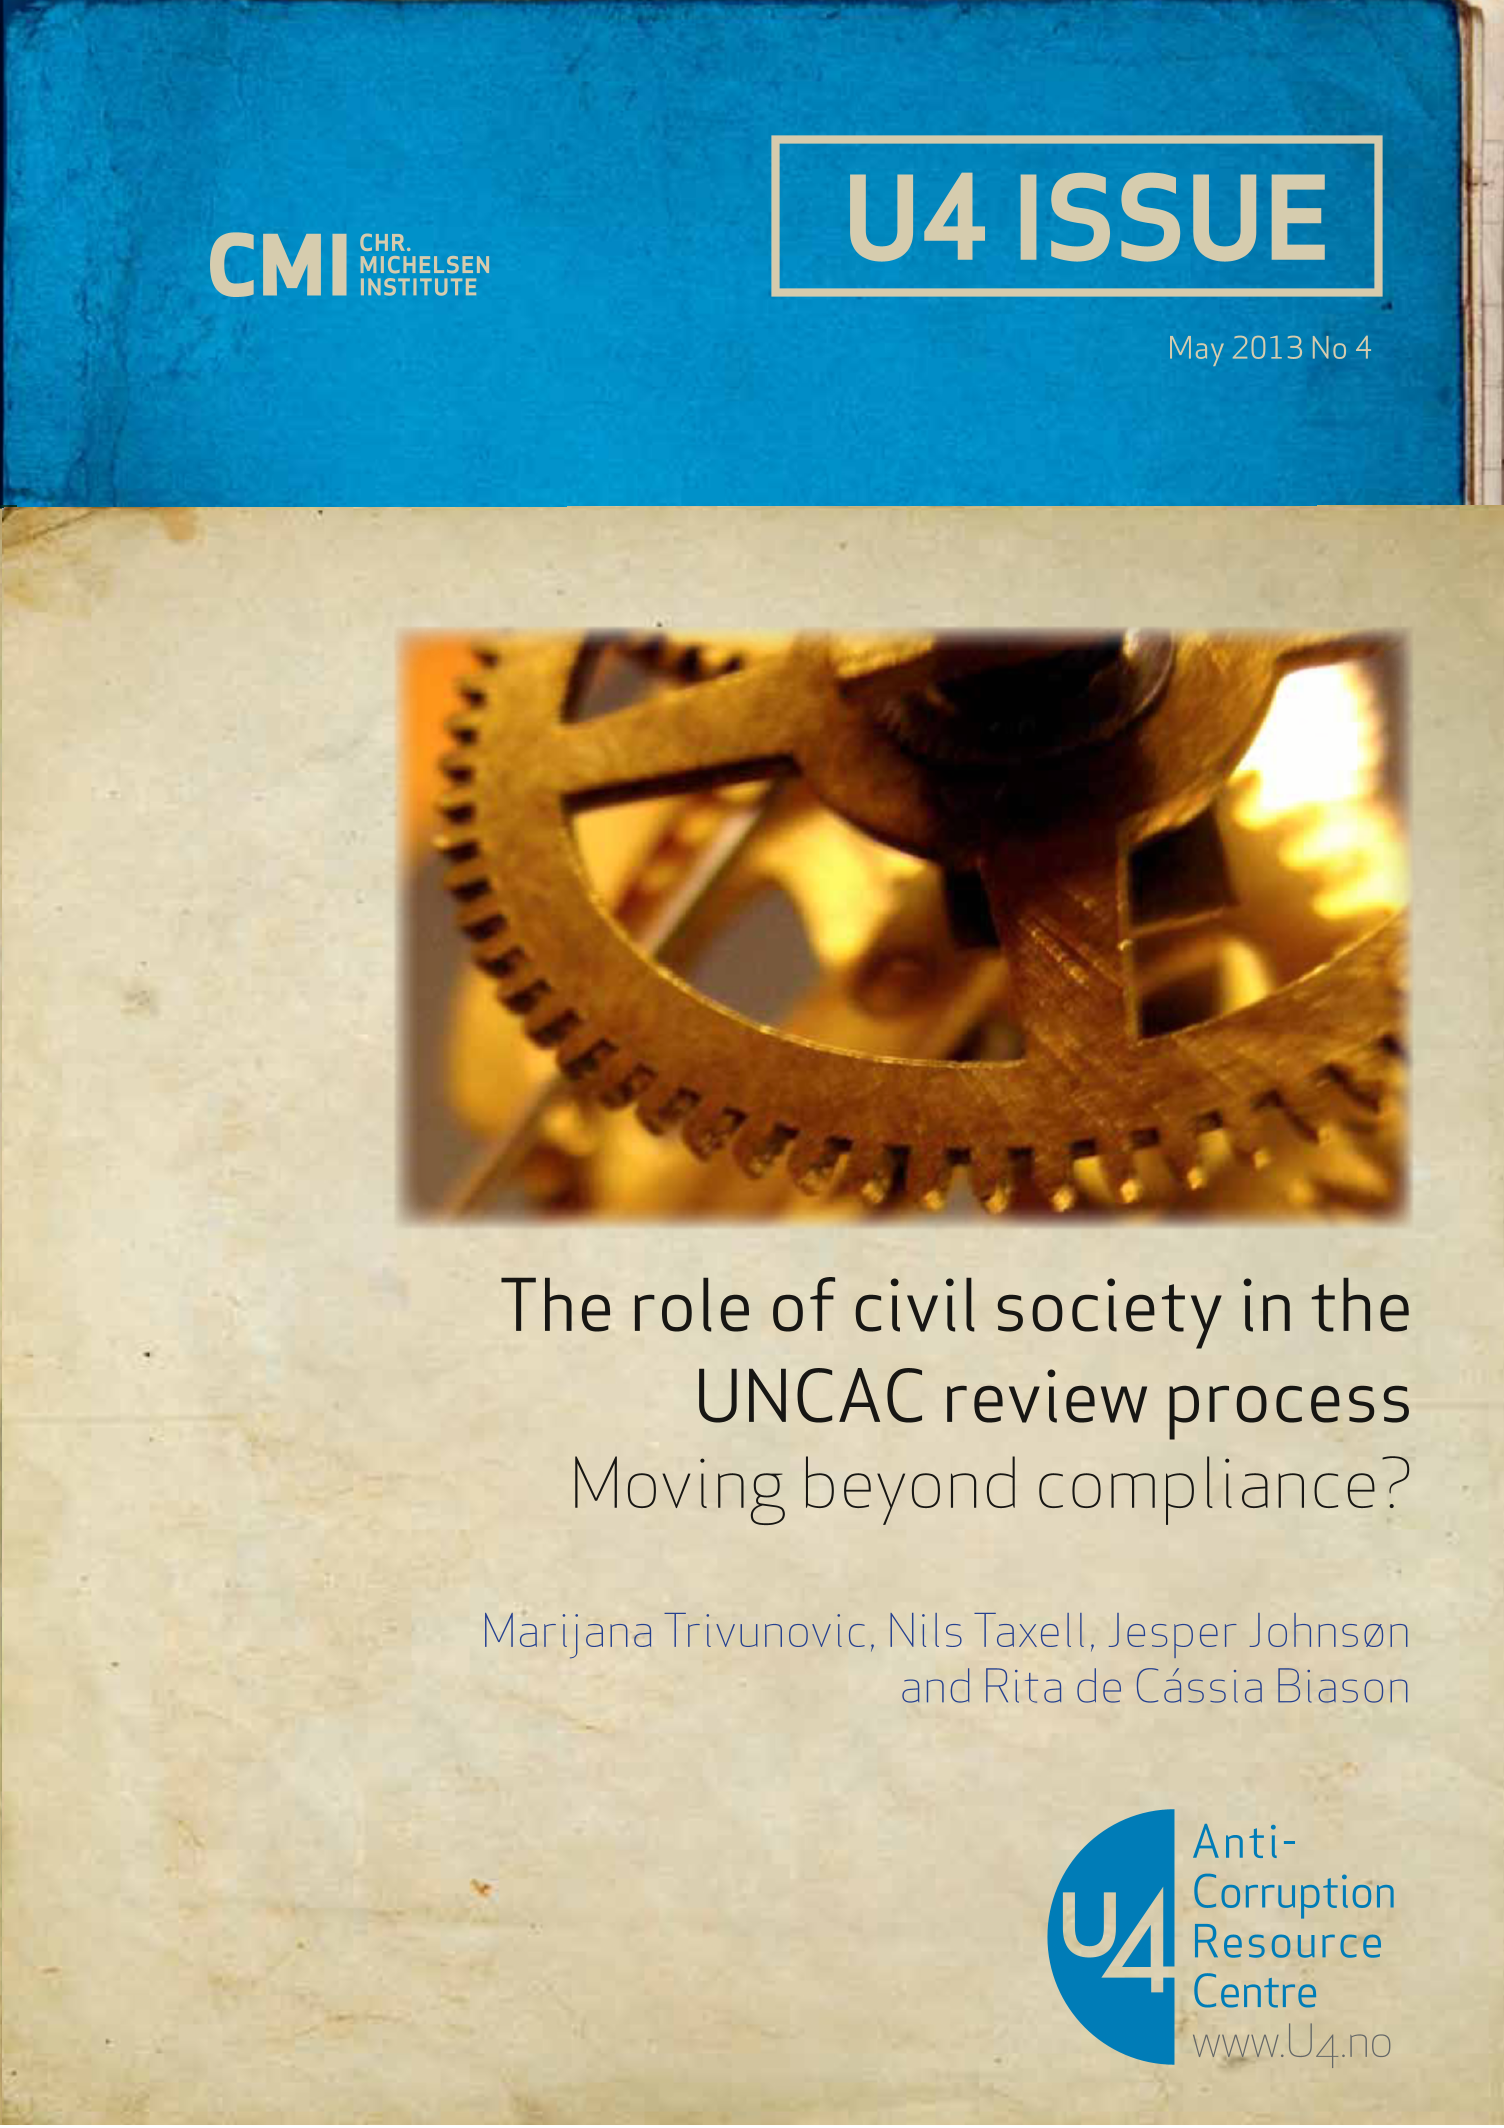 The role of civil society in the UNCAC review process: Moving beyond compliance?